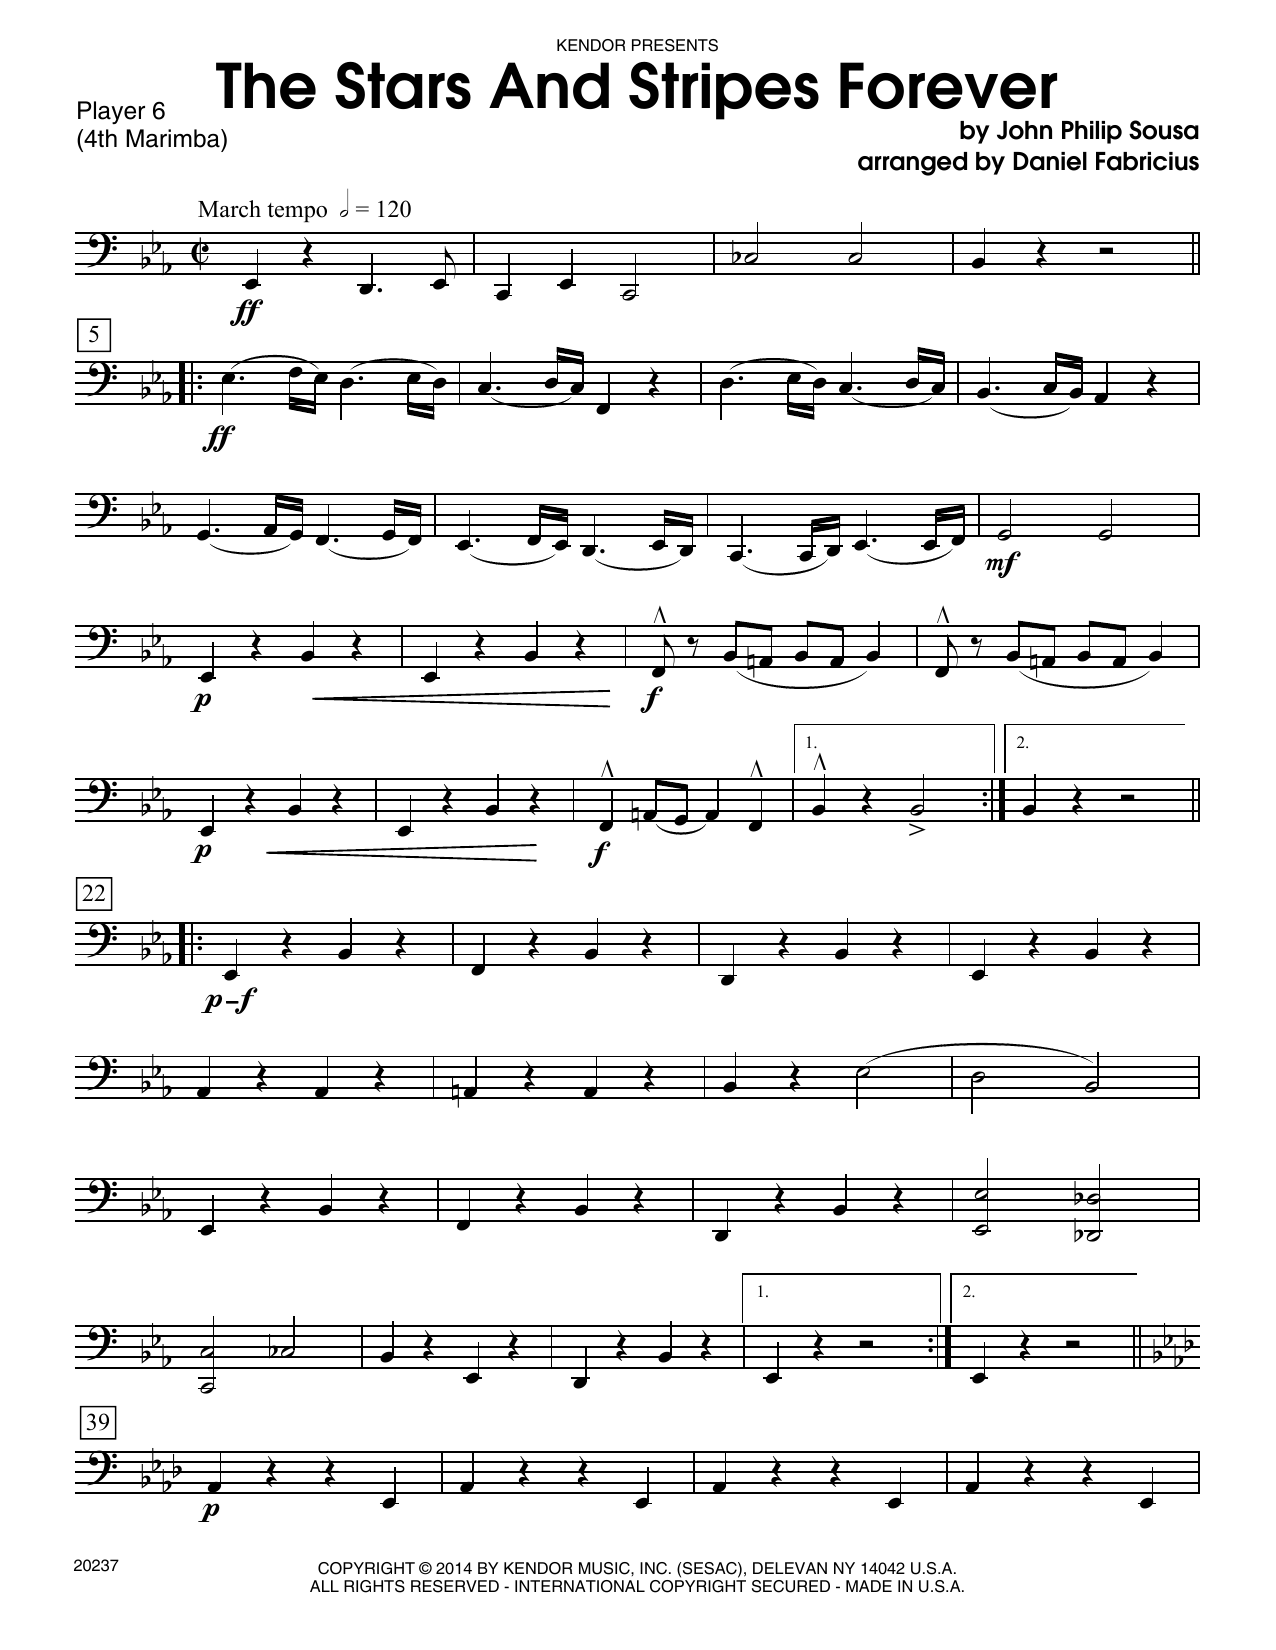 Download Daniel Fabricious The Stars And Stripes Forever - Percuss Sheet Music